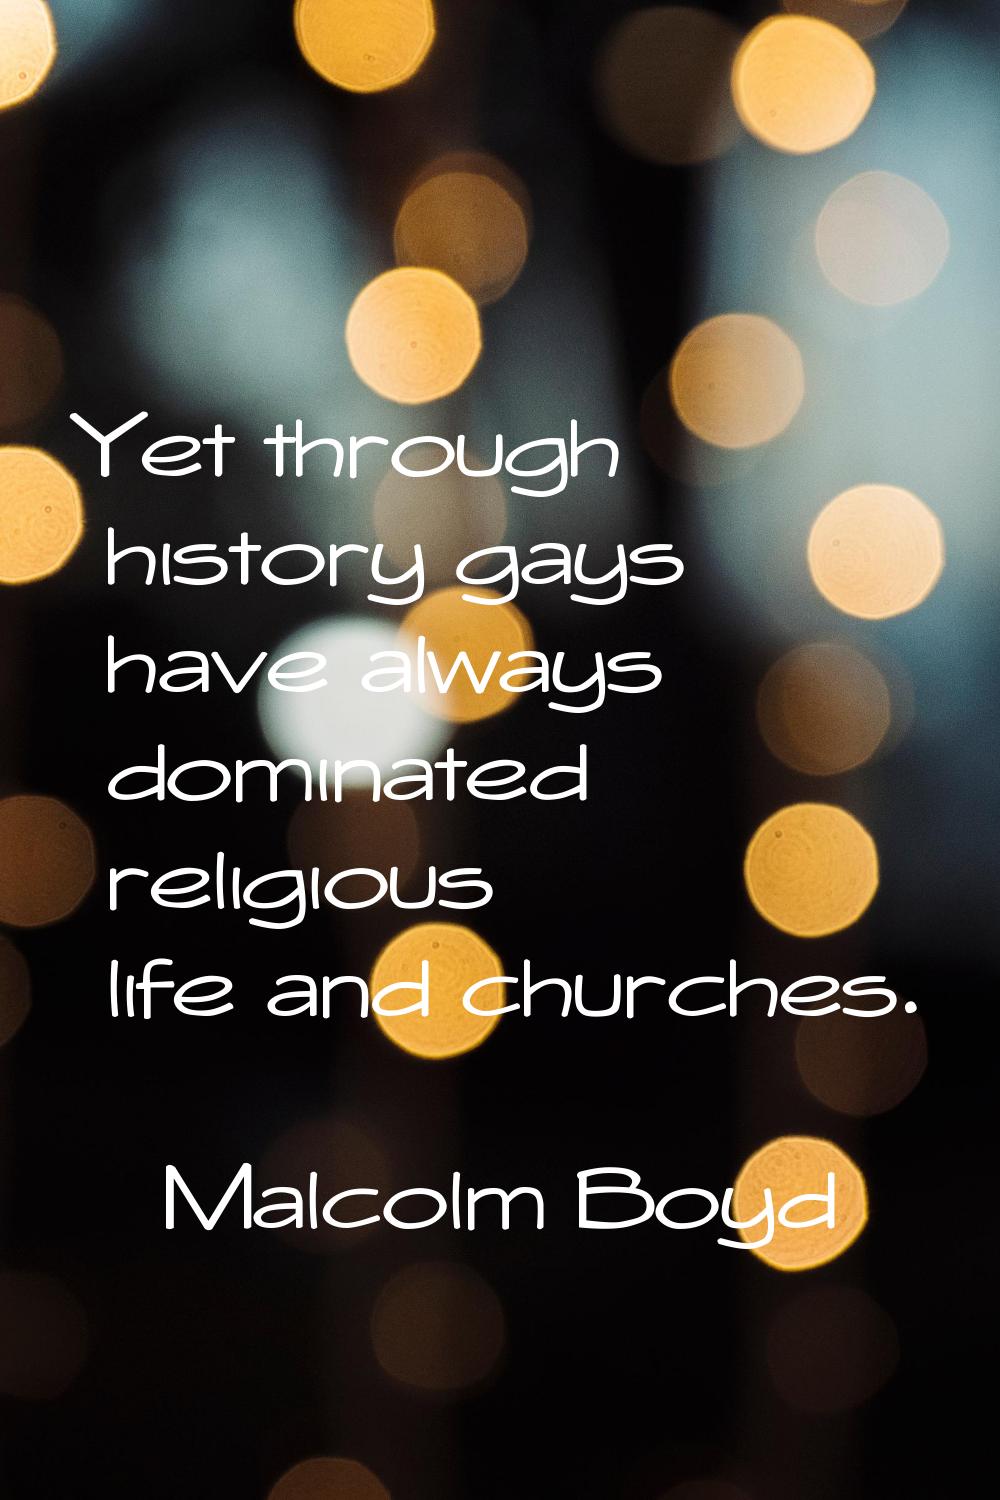 Yet through history gays have always dominated religious life and churches.